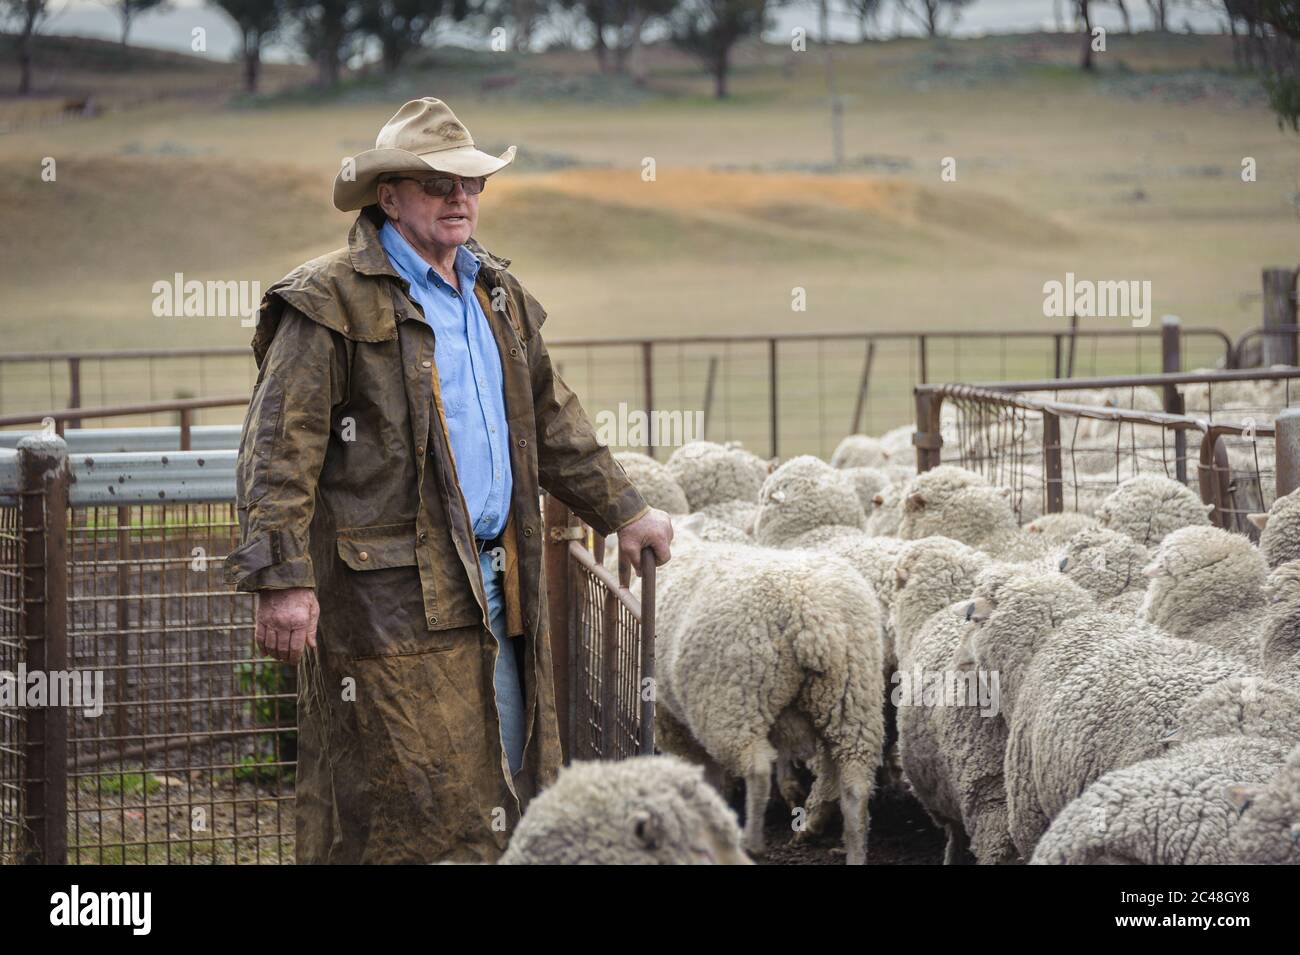 Sheep station manager pauses thoughtfully in a pen with a flock of sheep before shearing begins at Laura Station in New South Wales, Australia. Stock Photo